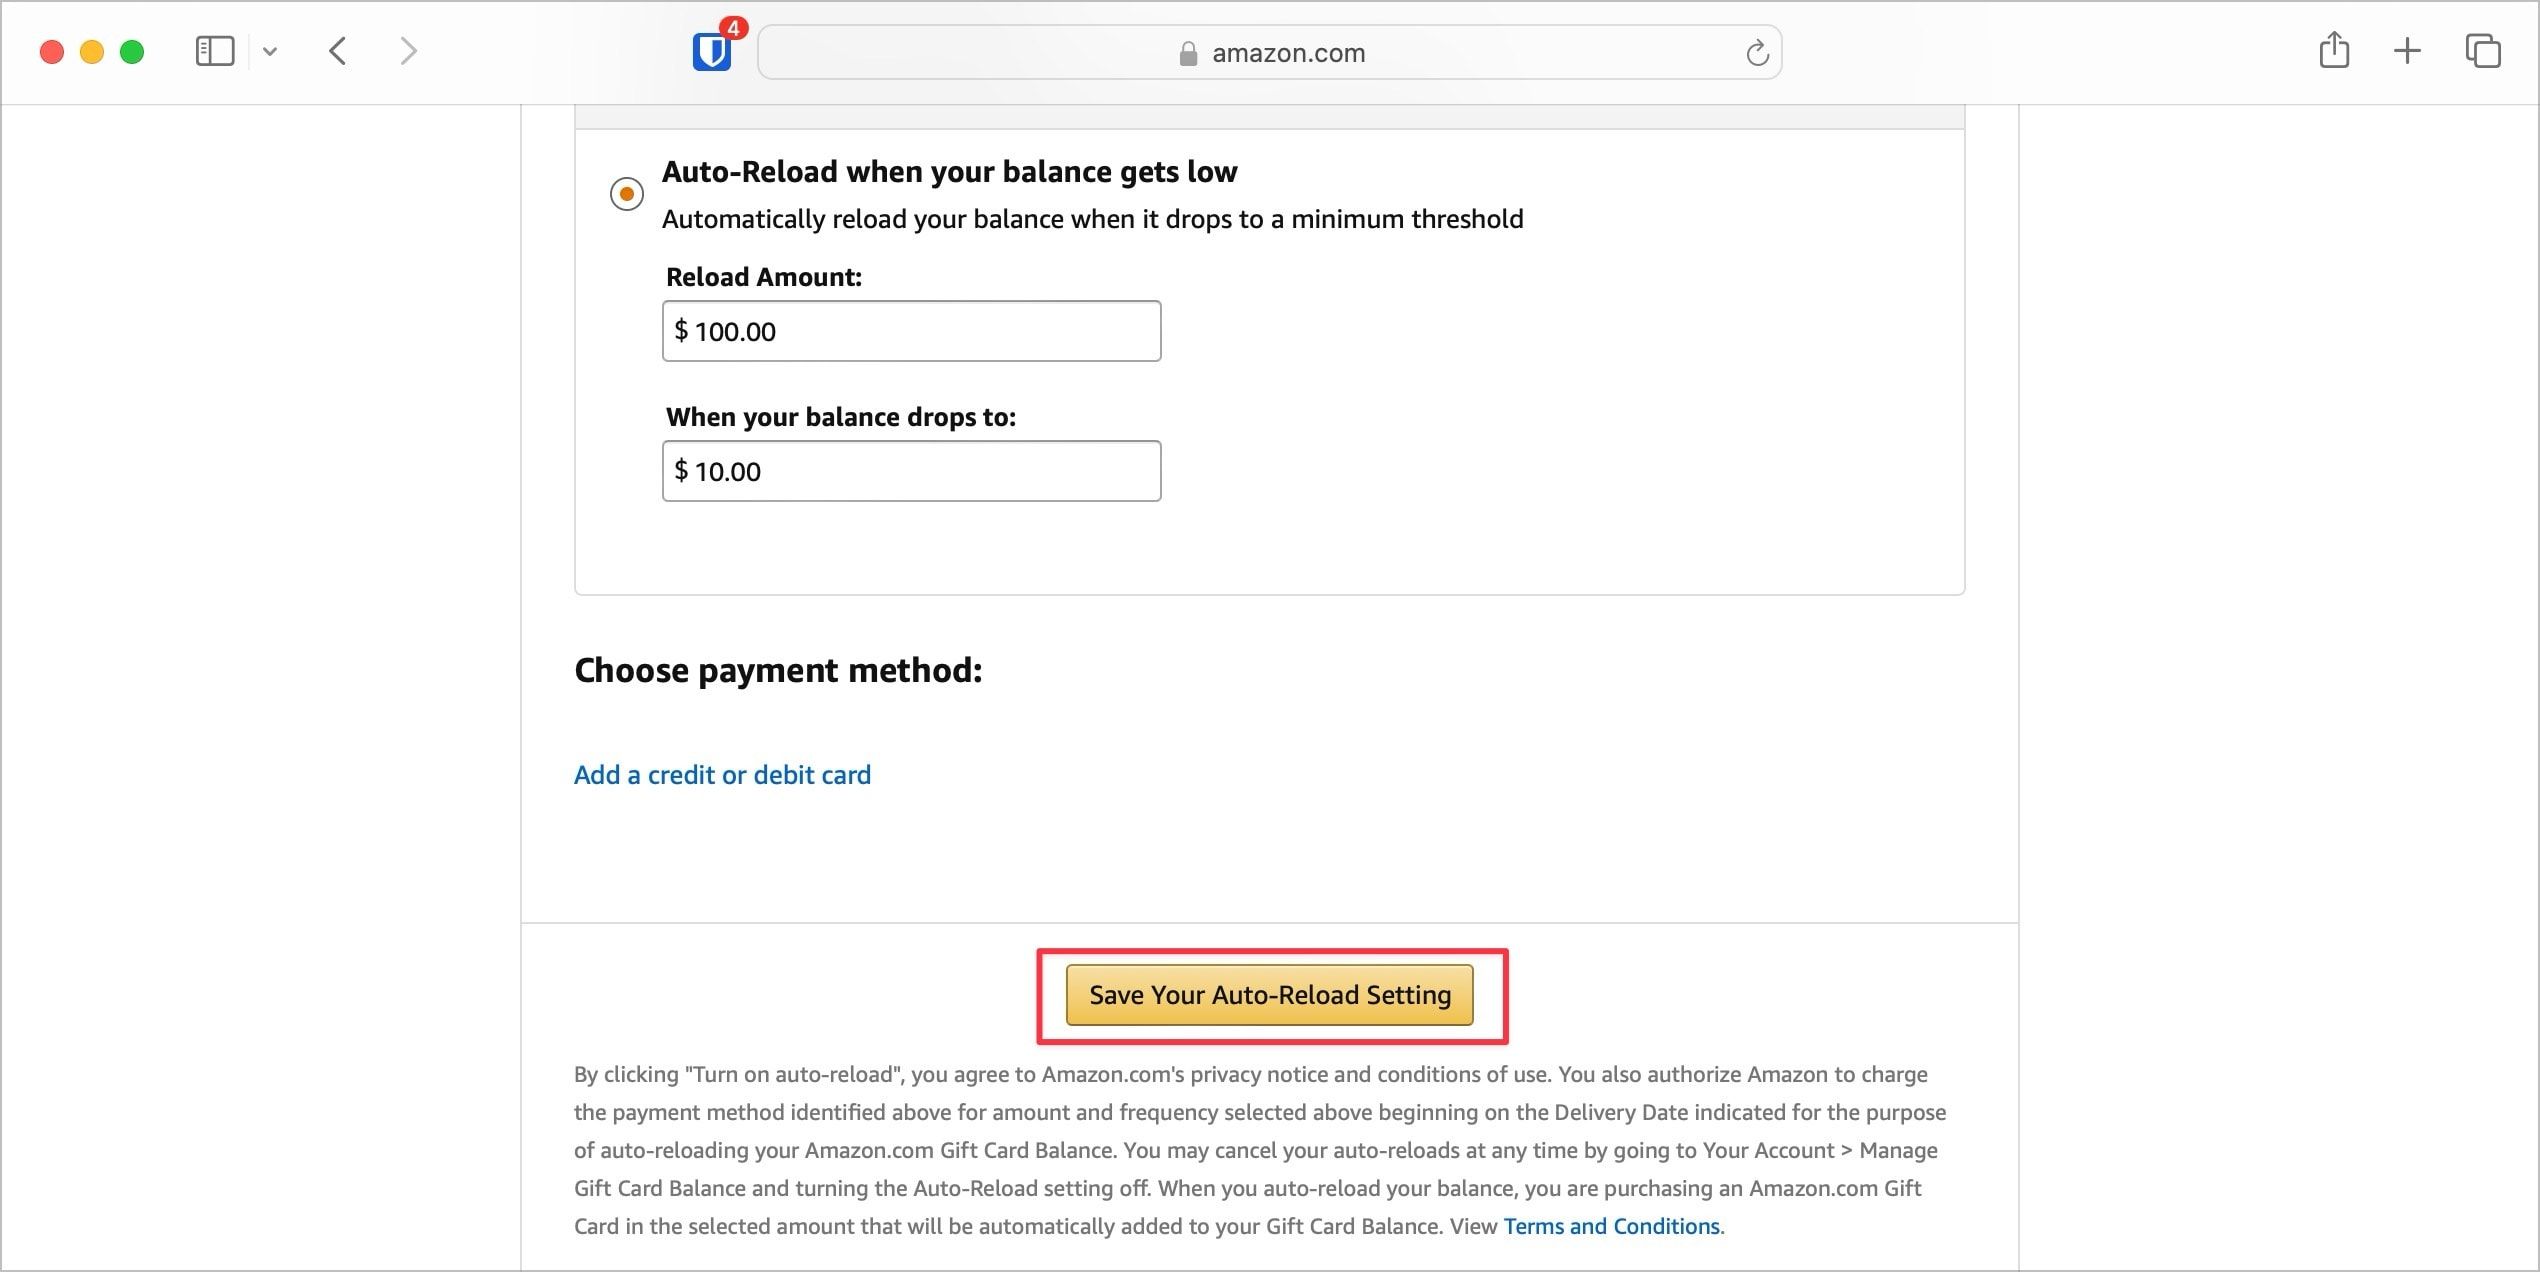 Amazon auto-reload page screenshot showing save your auto reload setting button